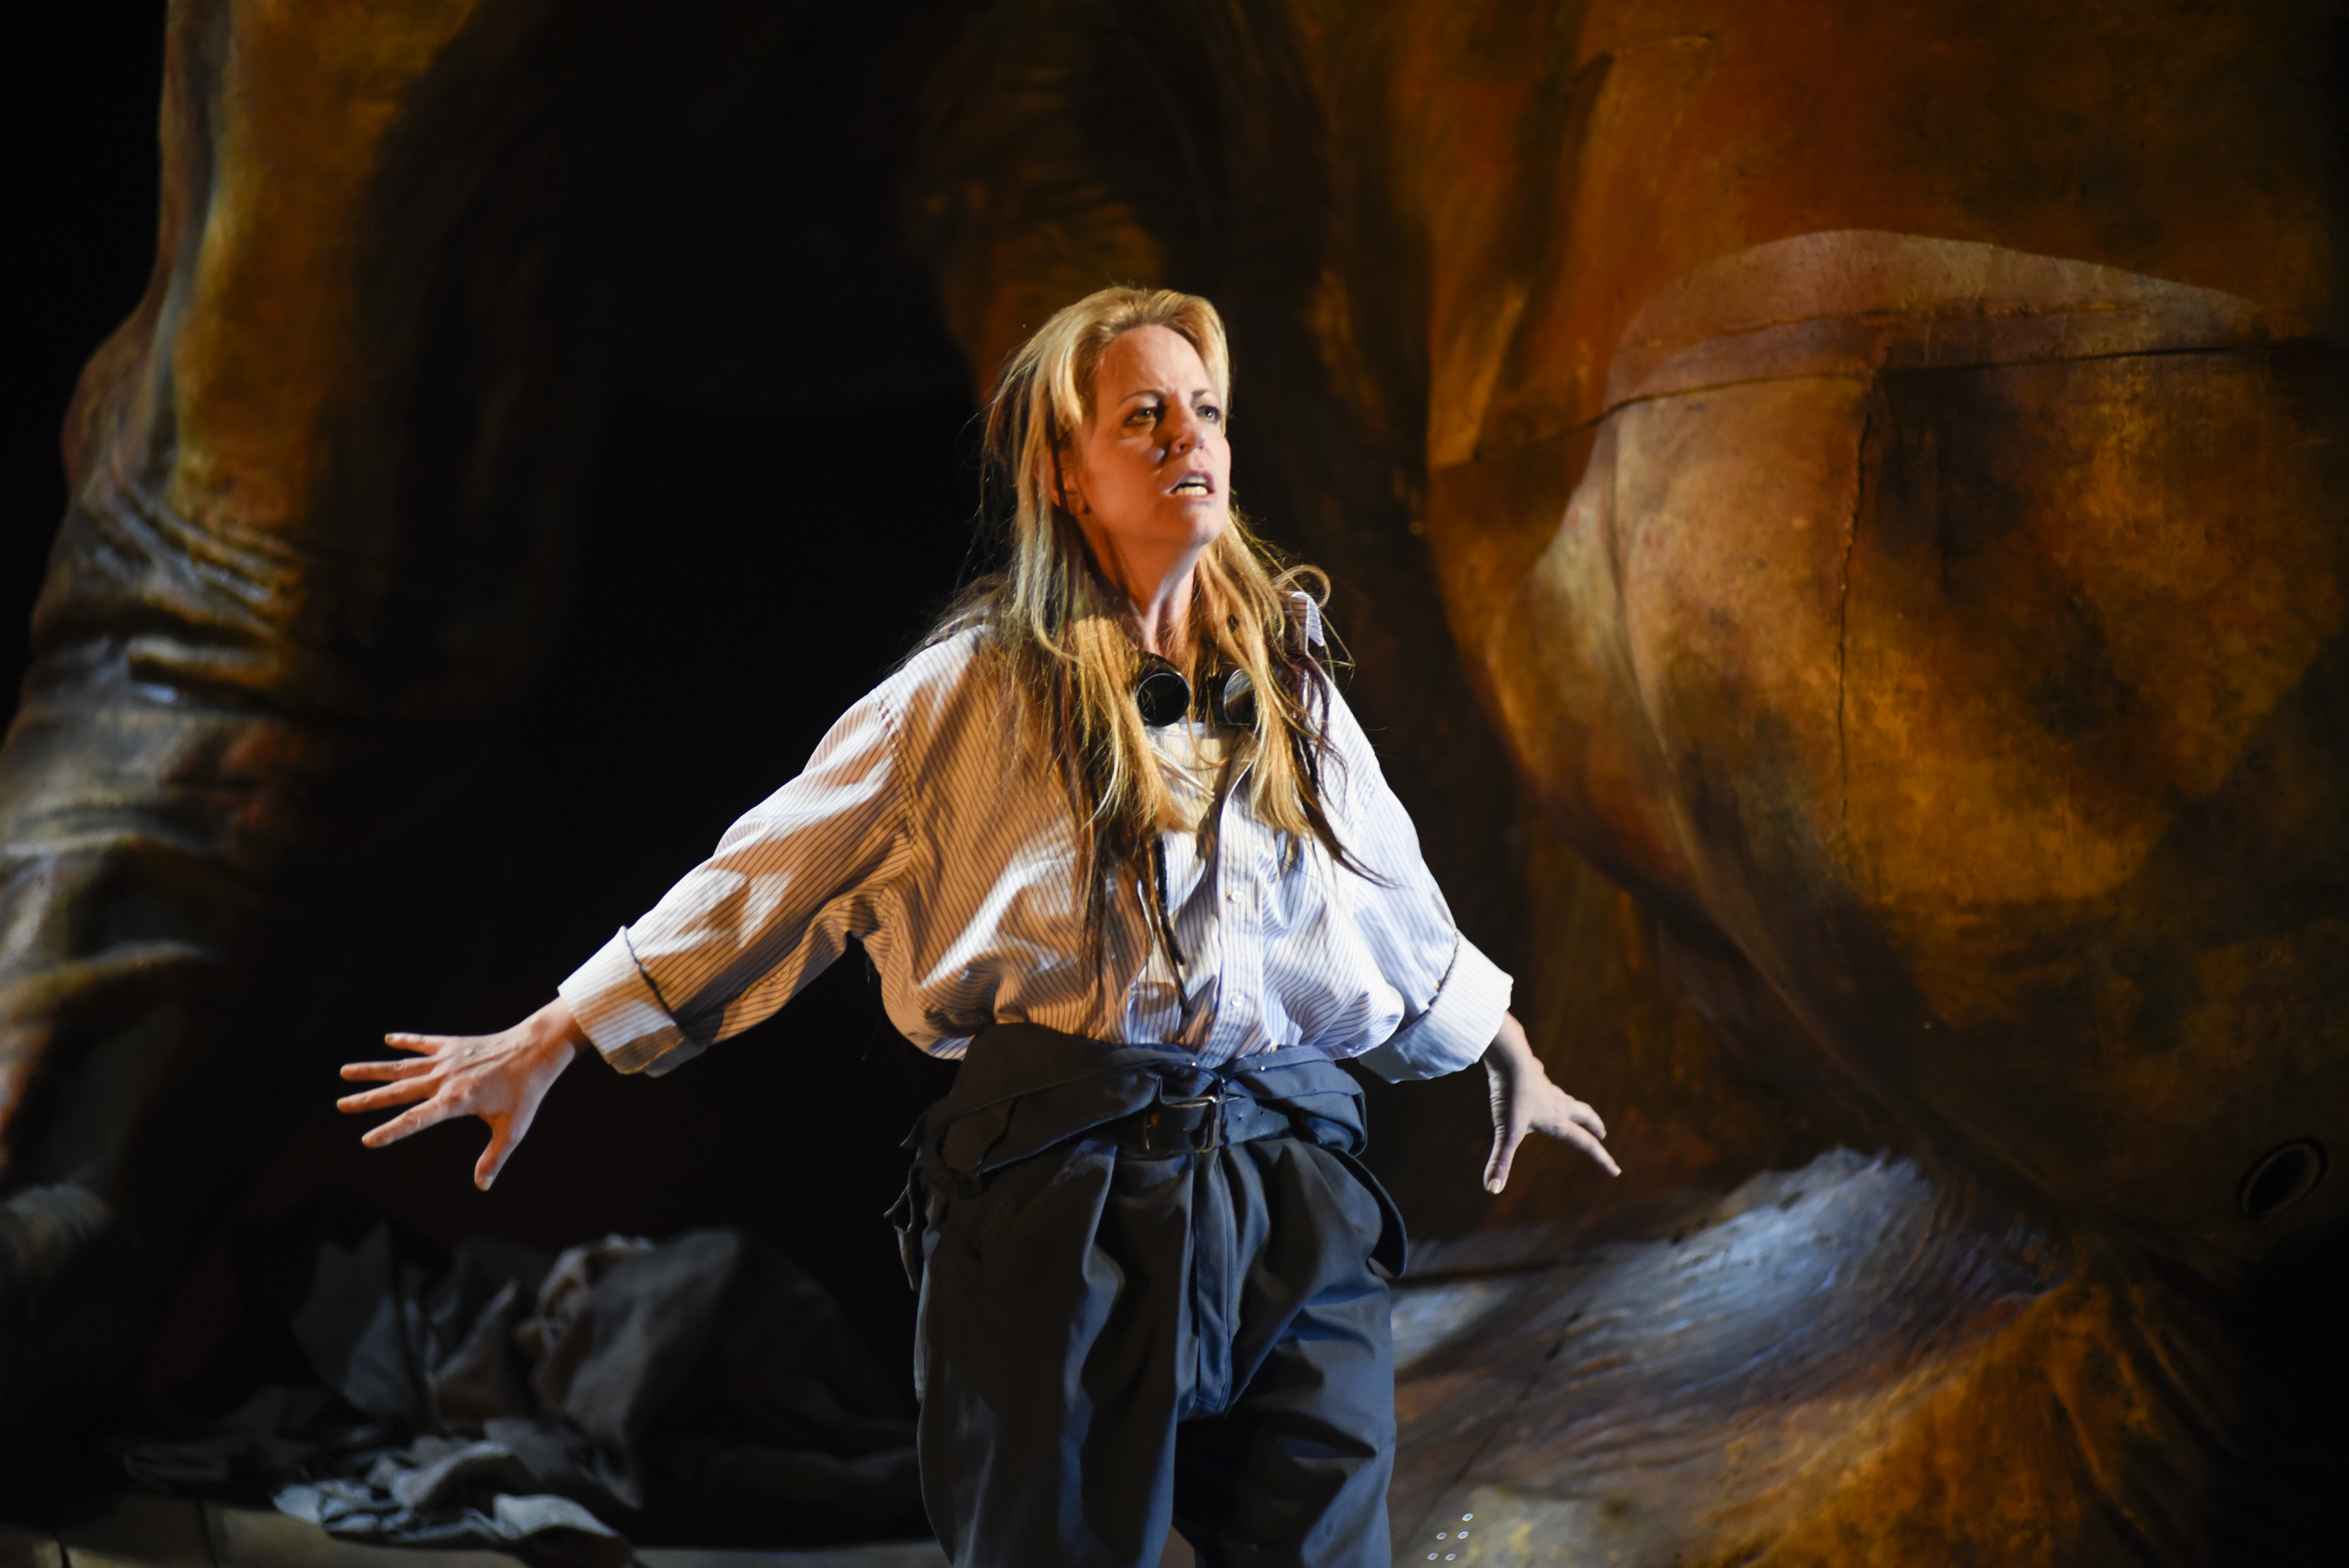 Lise Lindstrom plays Elektra, a woman seeking to avenge her father. Photo by Yves Renaud.